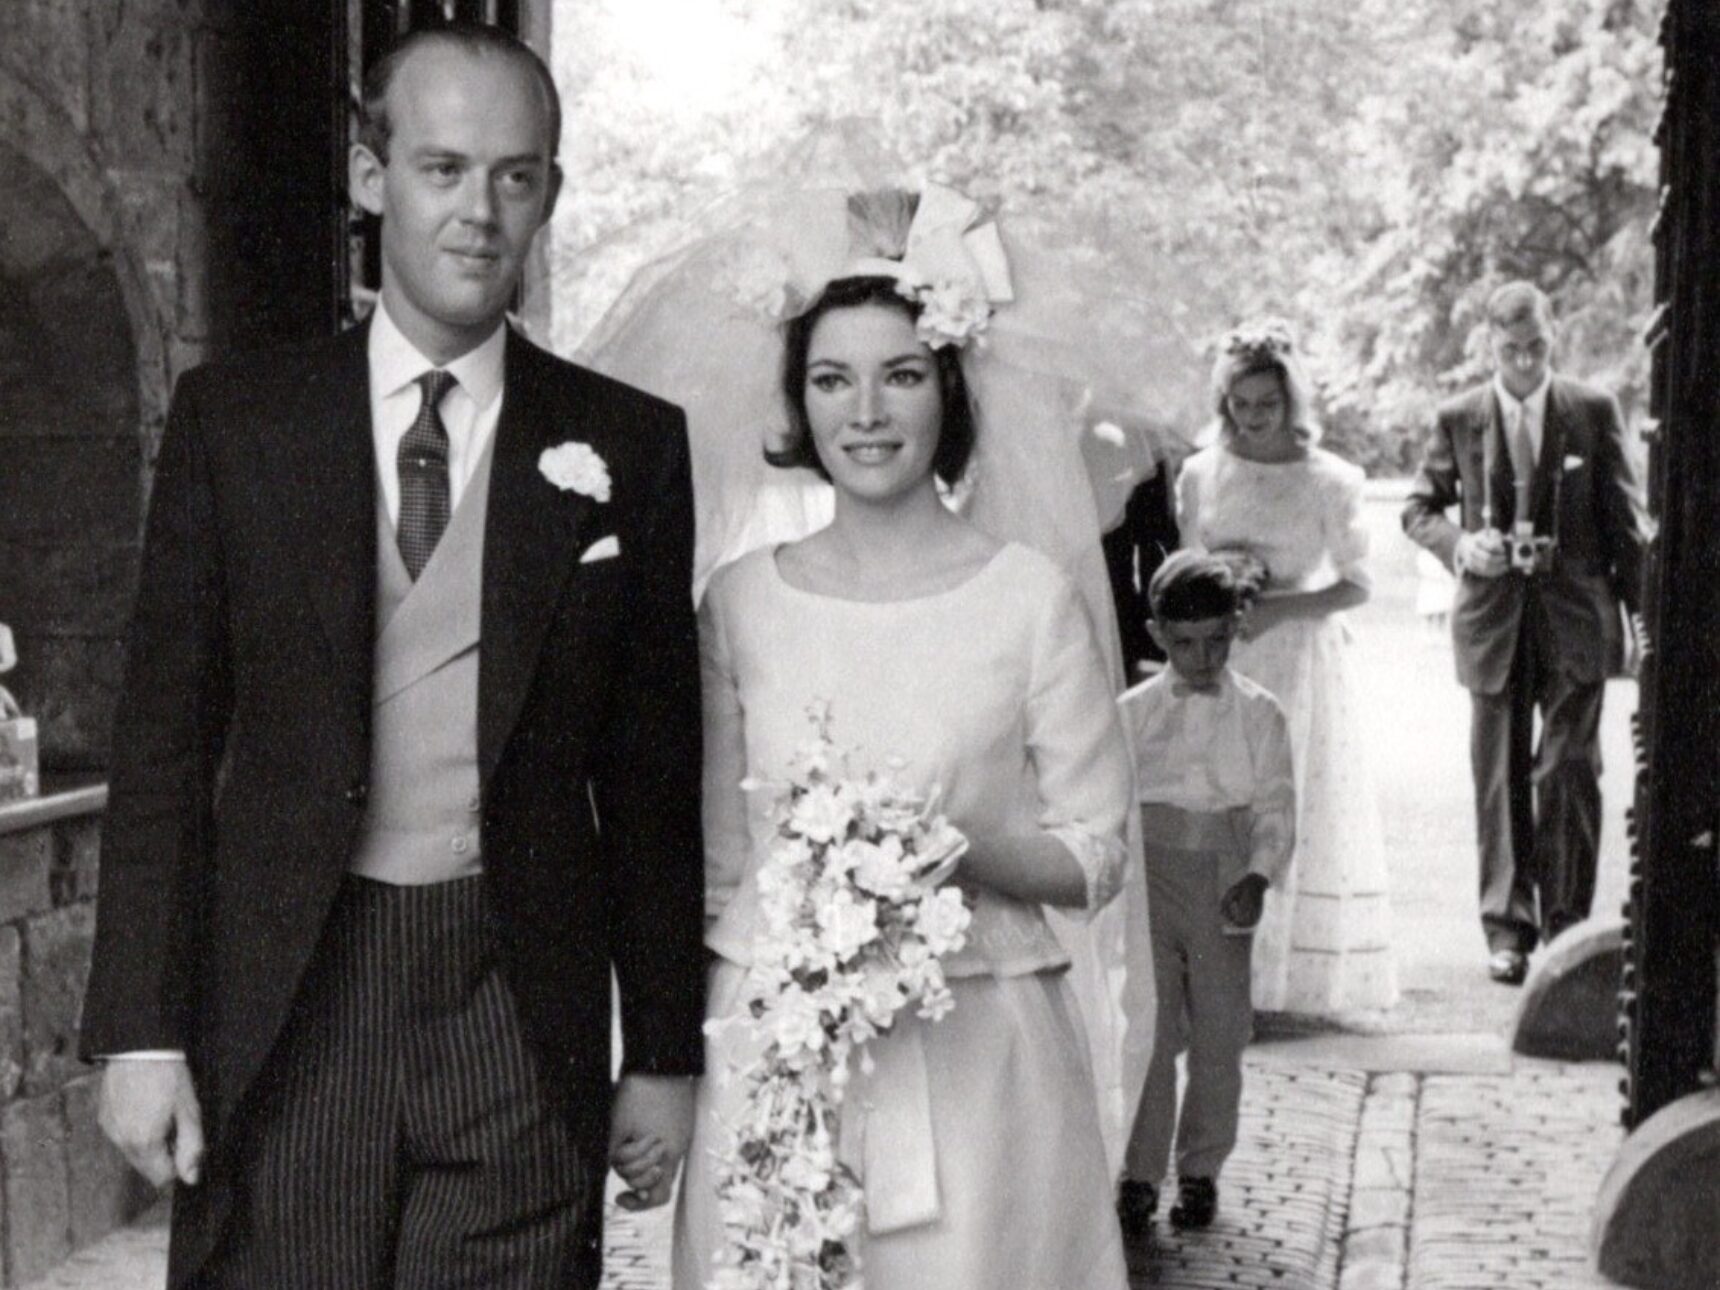 Lady Ashcombe first arrived at Sudeley in 1962 as the young American bride of Mark Dent-Brocklehurst